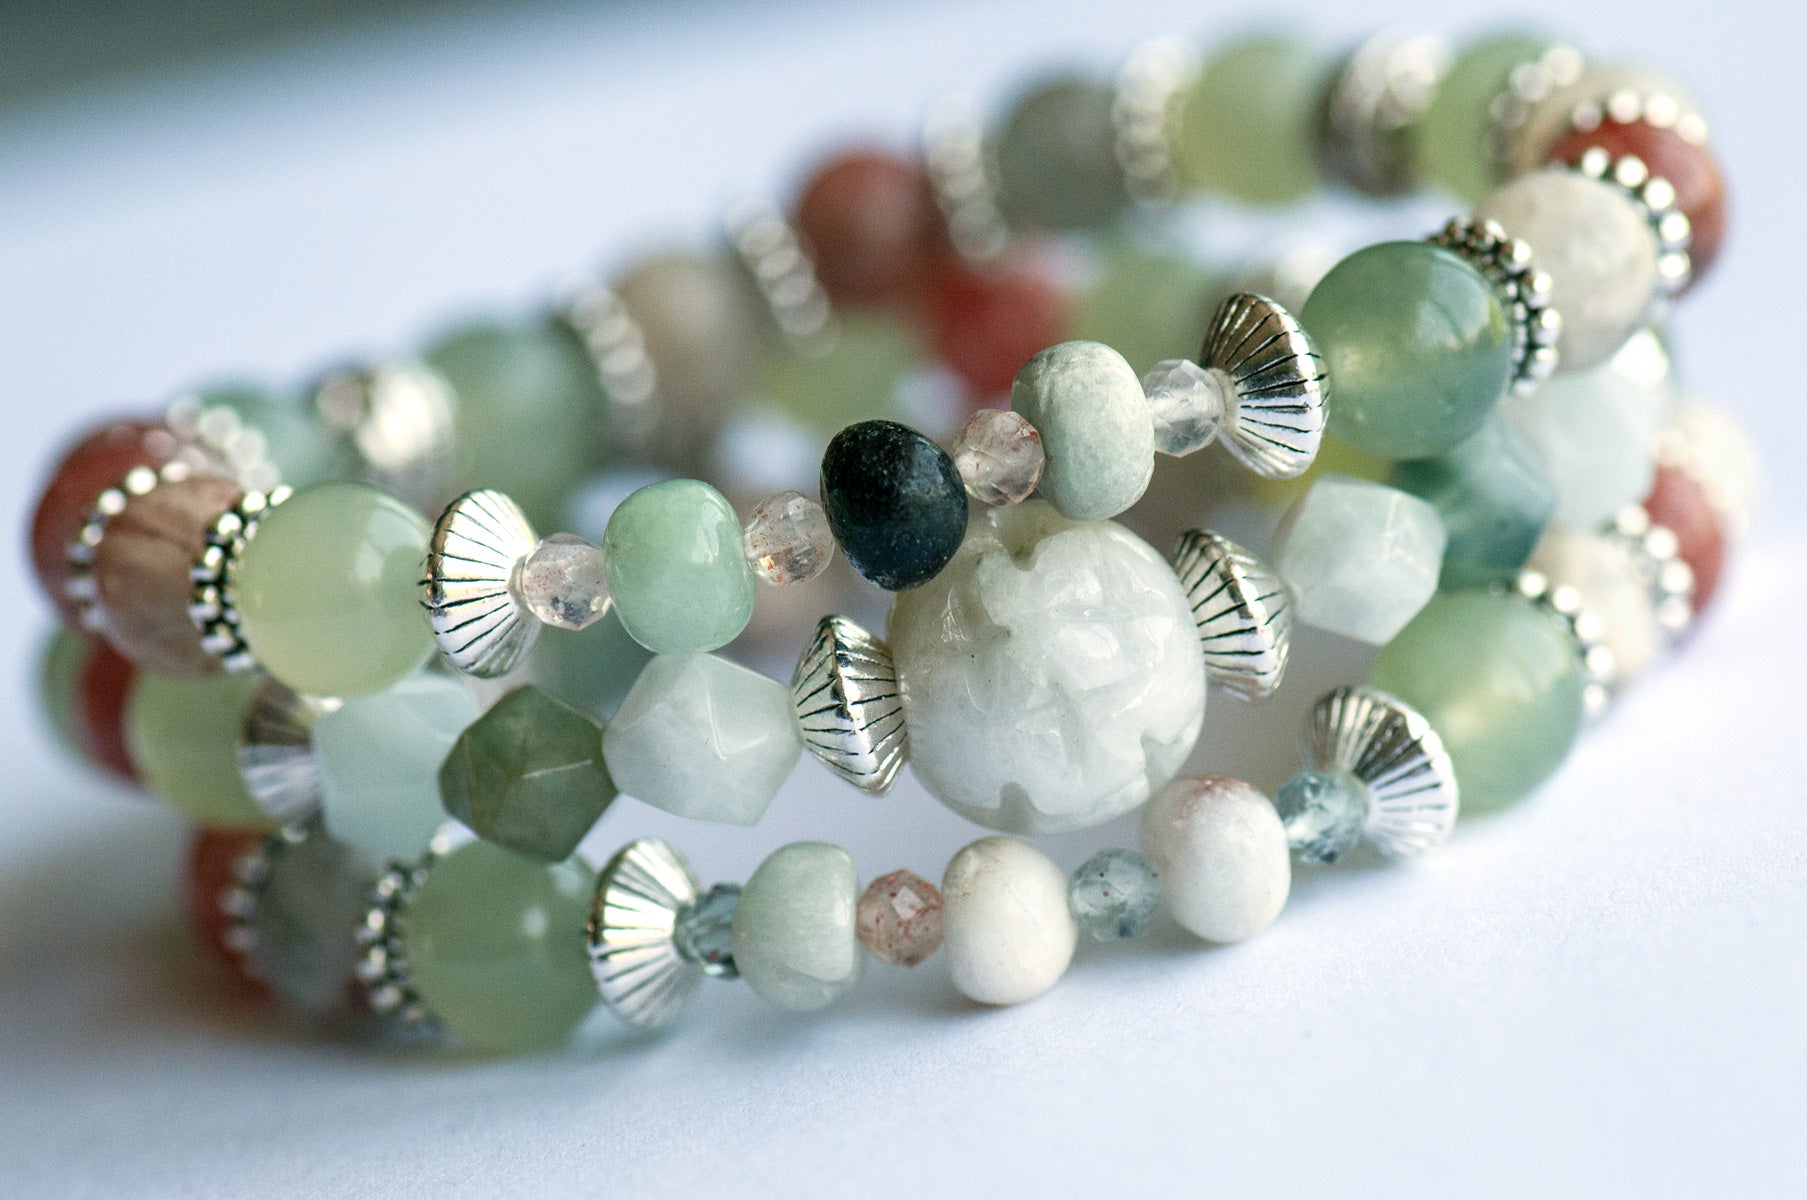 The Fierce Acceptance bracelet set is handmade with Jade, Arusha Sunstone, and Sepentine in calming shades of green and orange.